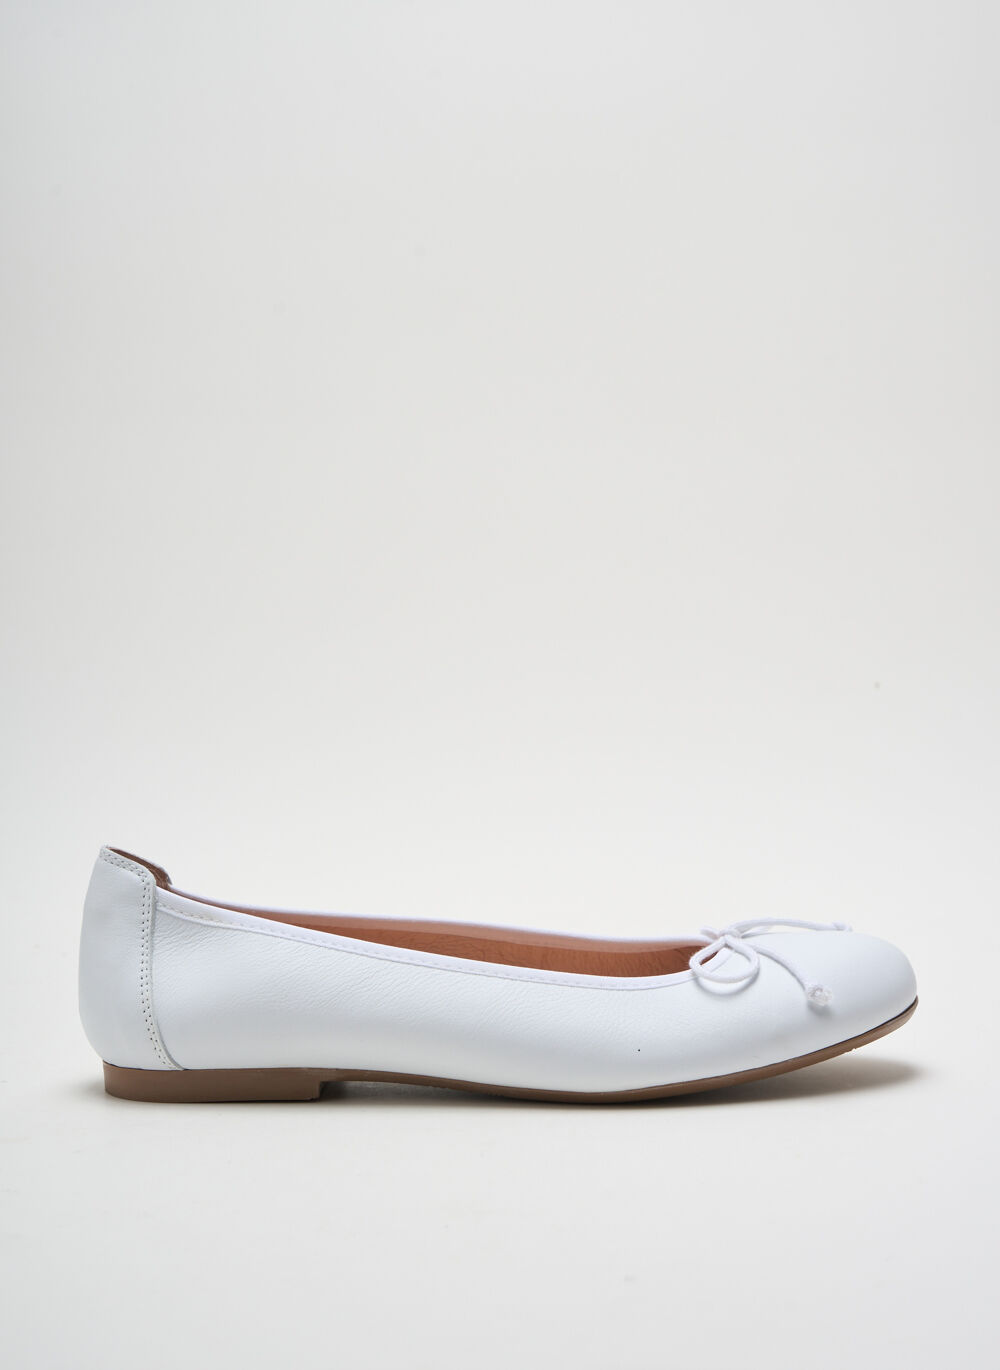 Ballerines fille Acebos blanc taille : 38 Vtements